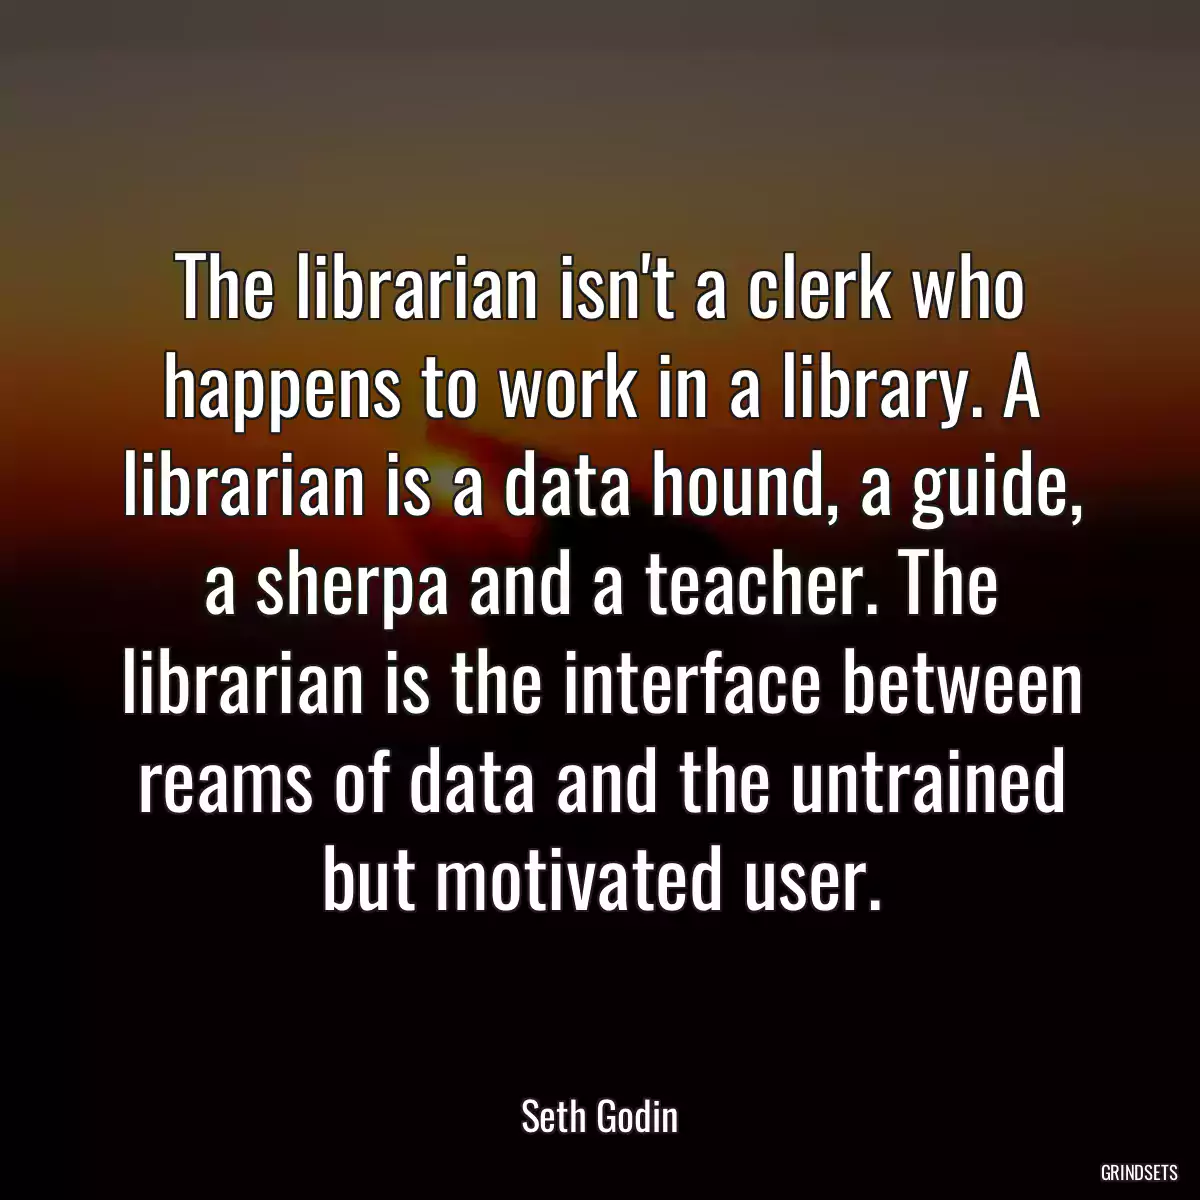 The librarian isn\'t a clerk who happens to work in a library. A librarian is a data hound, a guide, a sherpa and a teacher. The librarian is the interface between reams of data and the untrained but motivated user.